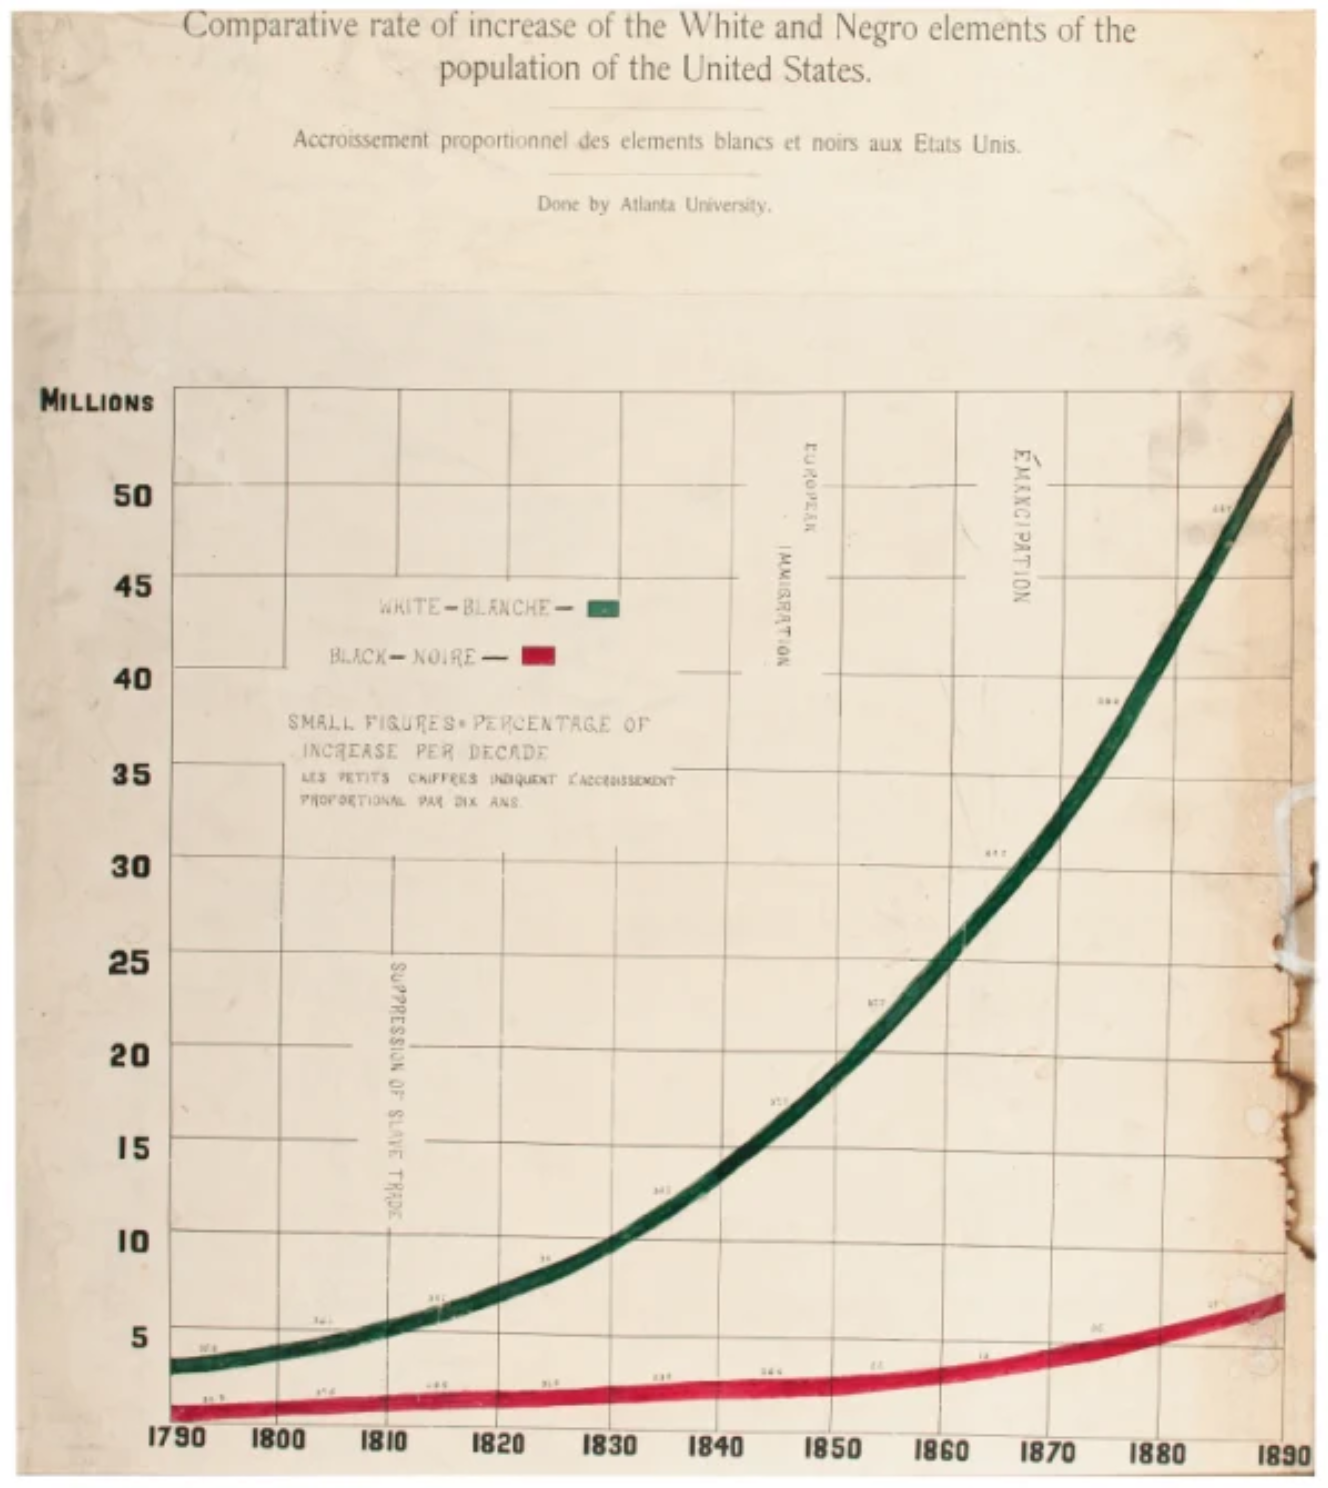 COMPARATIVE RATE OF INCREASE OF THE WHITE AND NEGRO ELEMENTS OF THE POPULATION OF THE UNITED STATES - PRINCETON ARCHITECTURAL PRESS